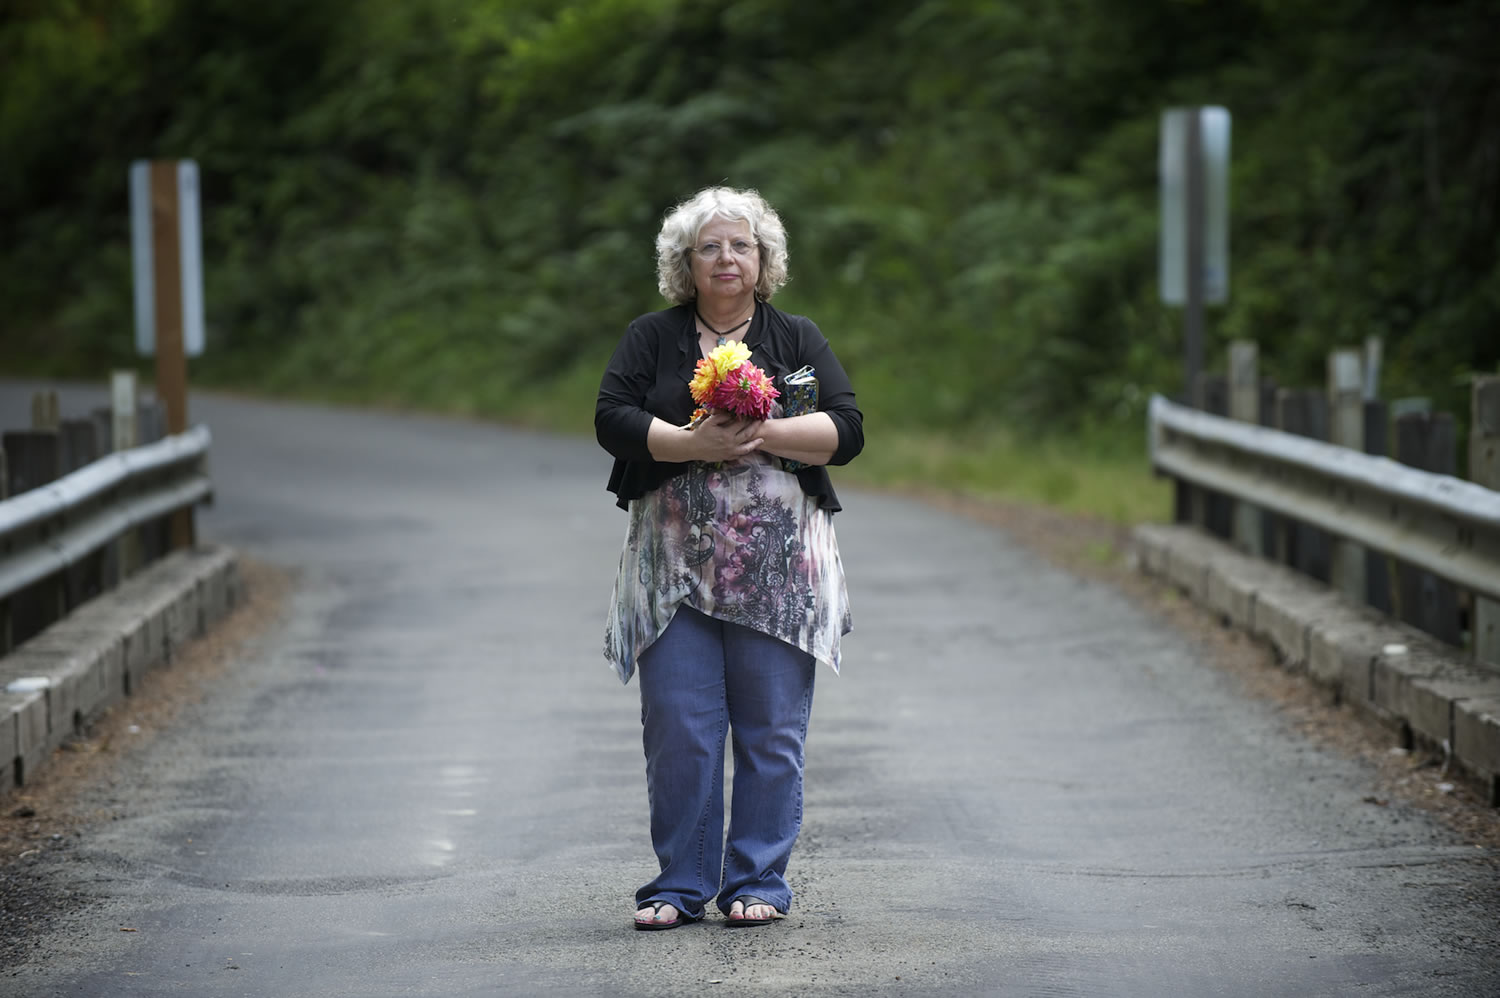 Starr Lara poses for a portrait July 12 on a bridge where some of her sister's belongings were found. Convicted killer Warren L. Forrest is suspected in connection with the disappearance of Lara's sister, Jamie Grissim, in 1971.